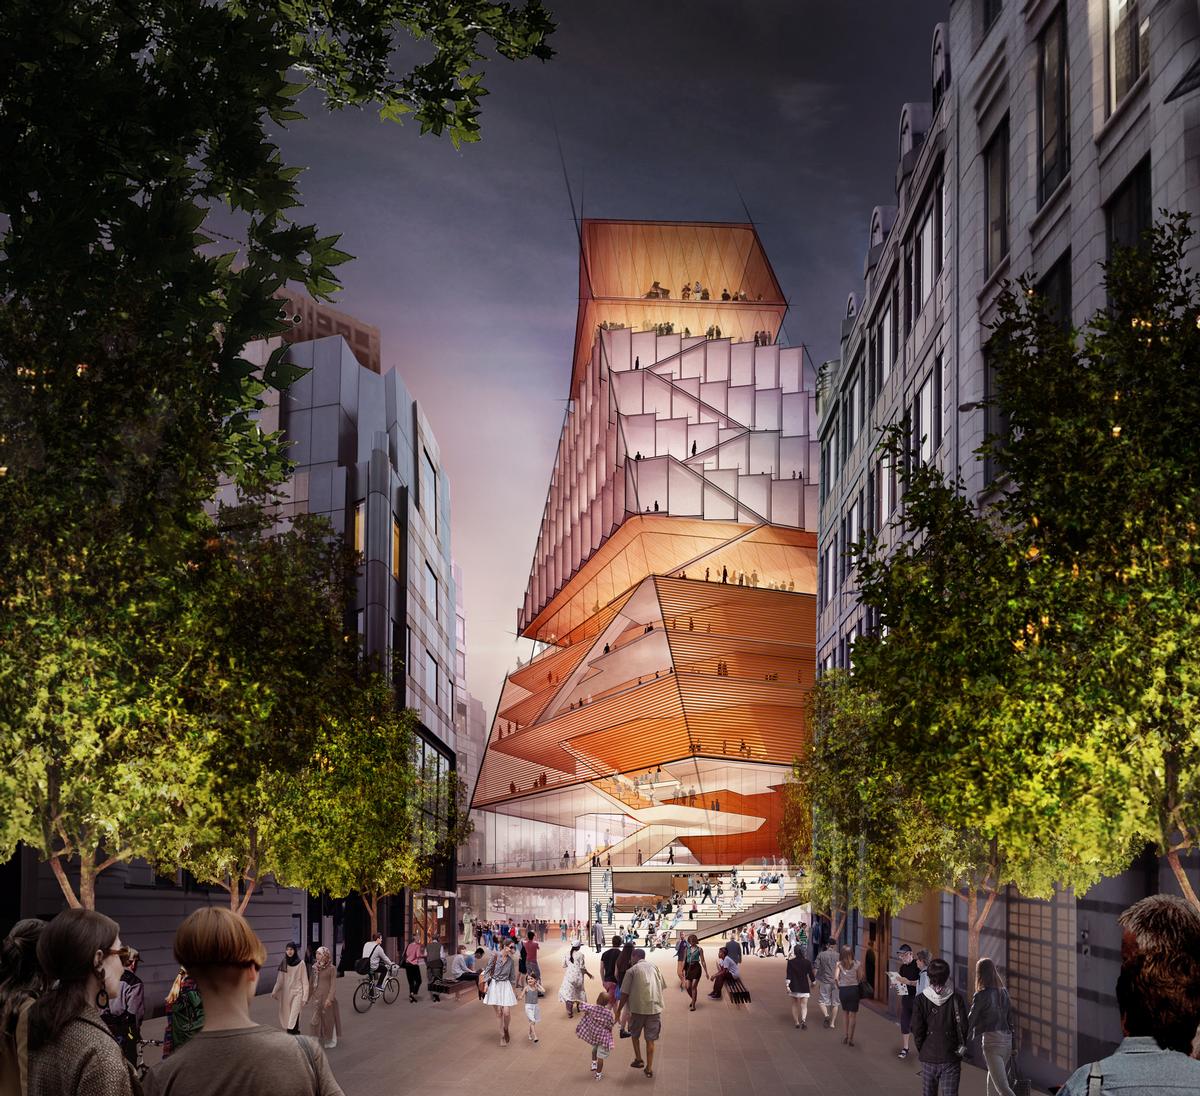 The Centre for Music will serve as a focal point of the London Culture Mile. / Courtesy of Diller Scofdio + Renfro